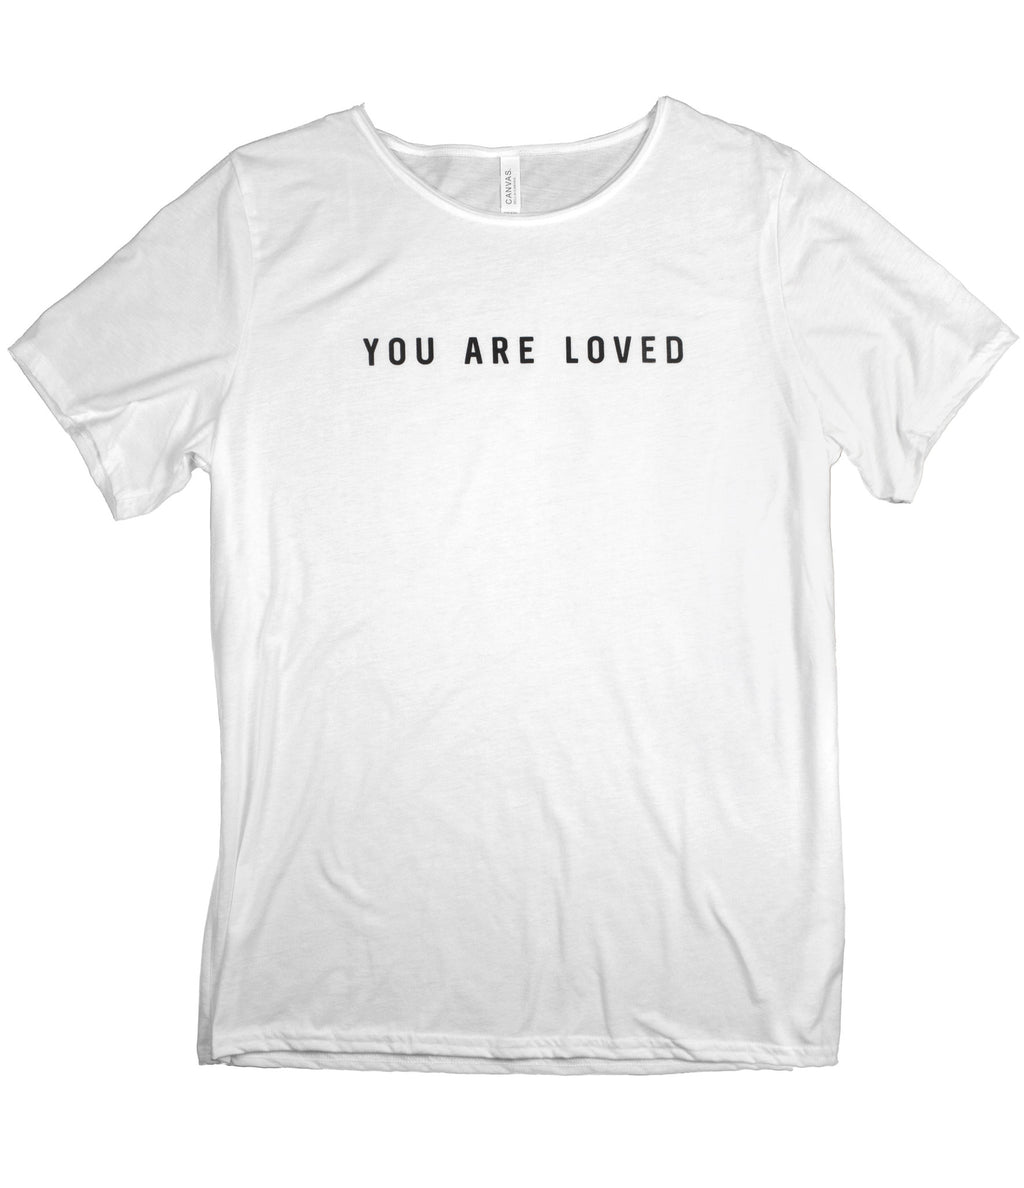 YOU ARE LOVED WHITE RAW NECK T-SHIRT